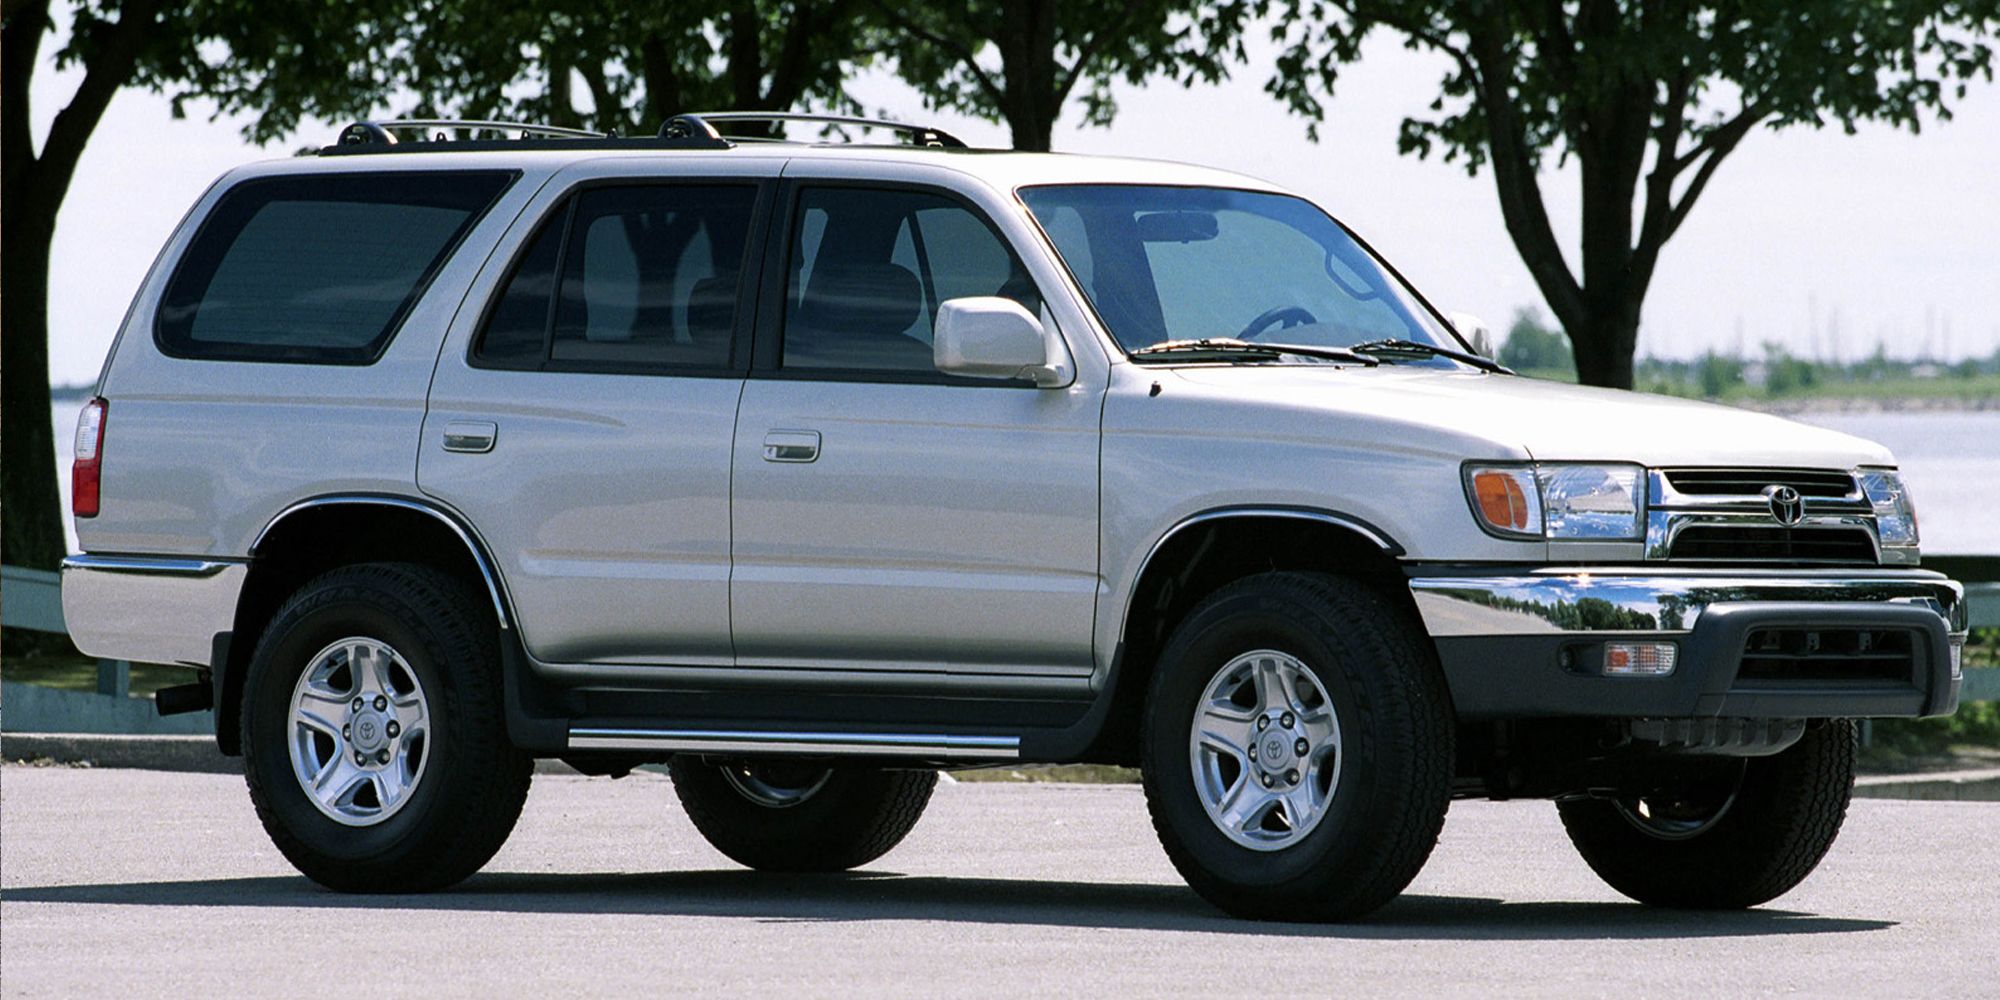 Front 3/4 view of a silver 4Runner